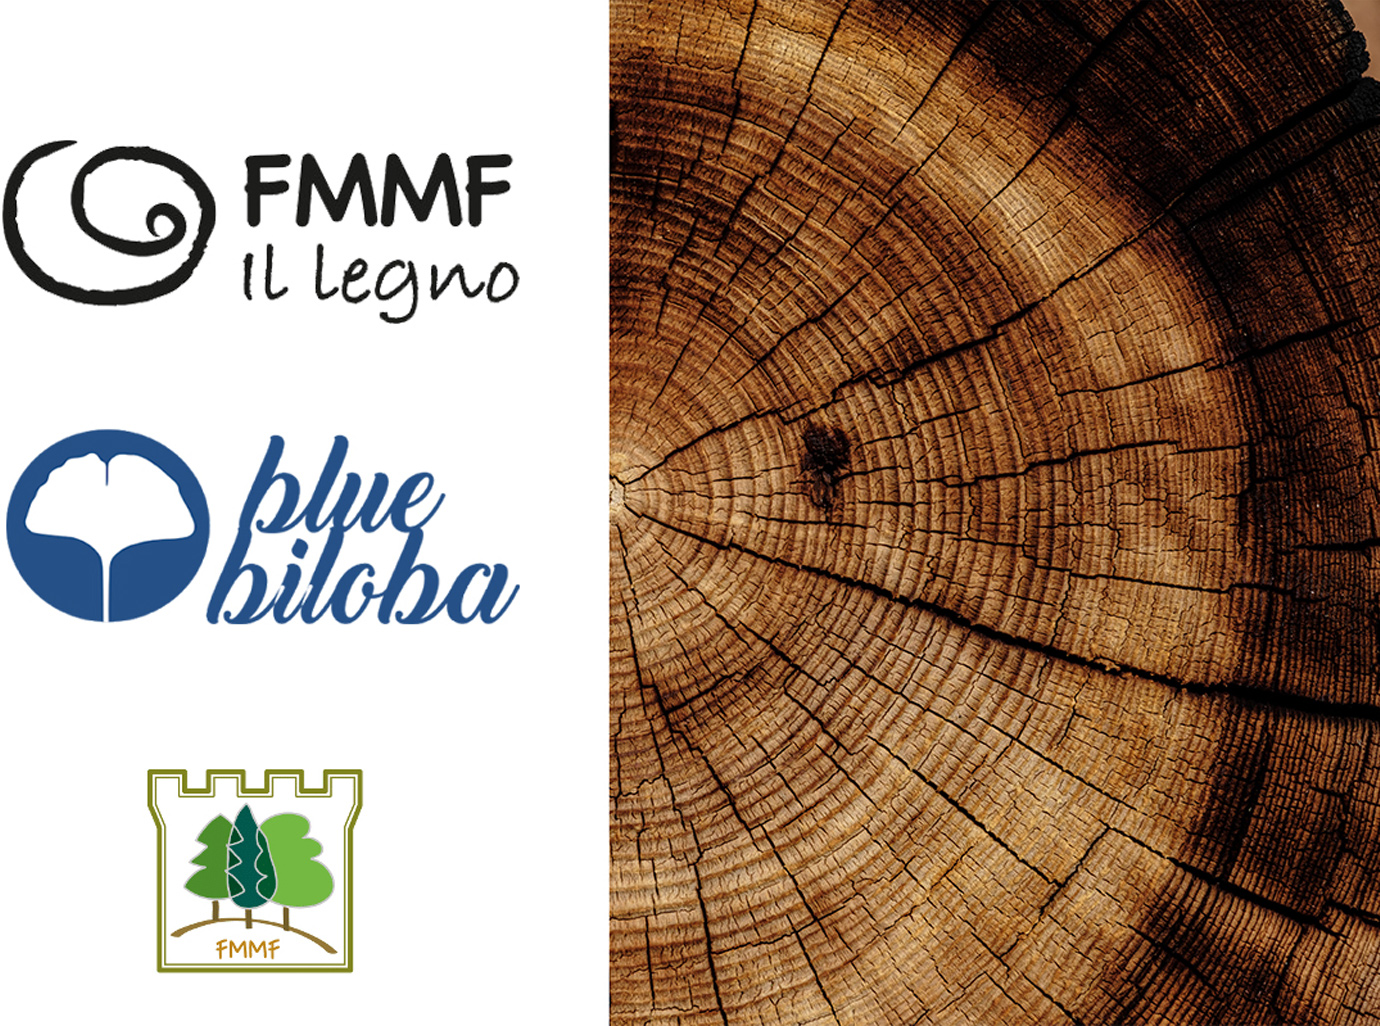 New managers of the “FMMF il legno” brand